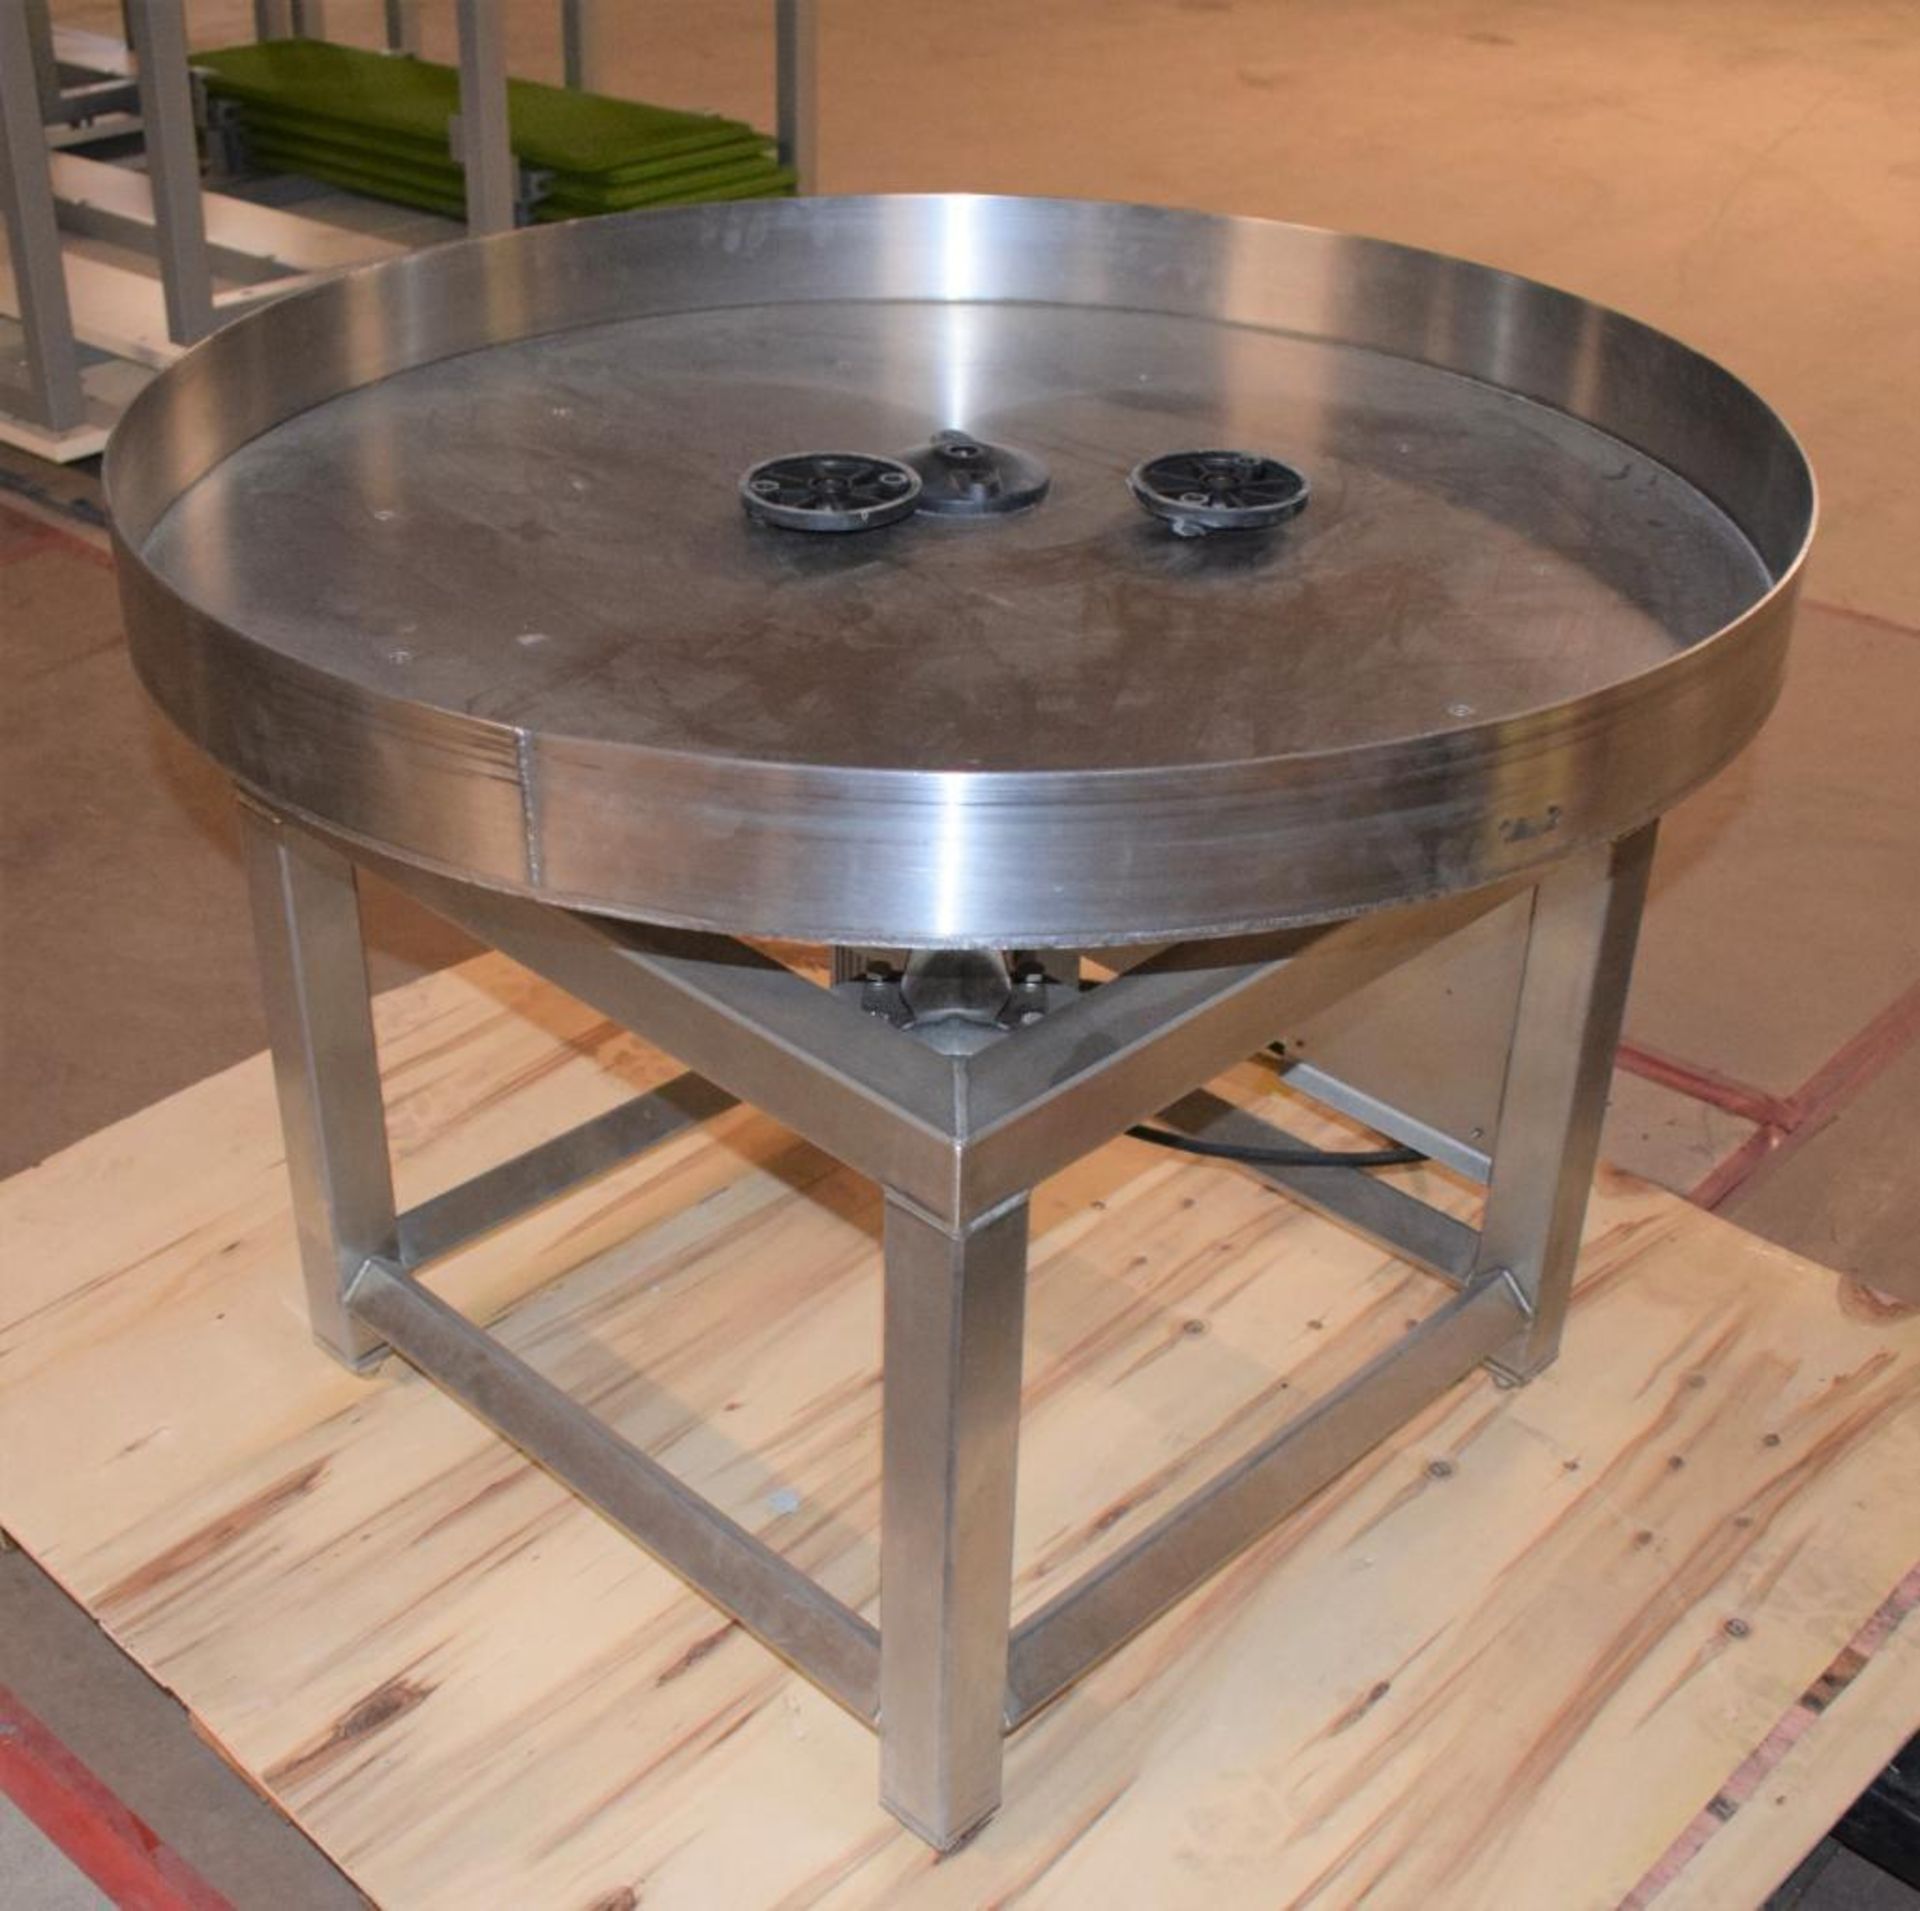 Accumulation Table, Approximate 36" Diameter, Stainless Steel. Includes a gearmotor and Lenze AC Tec